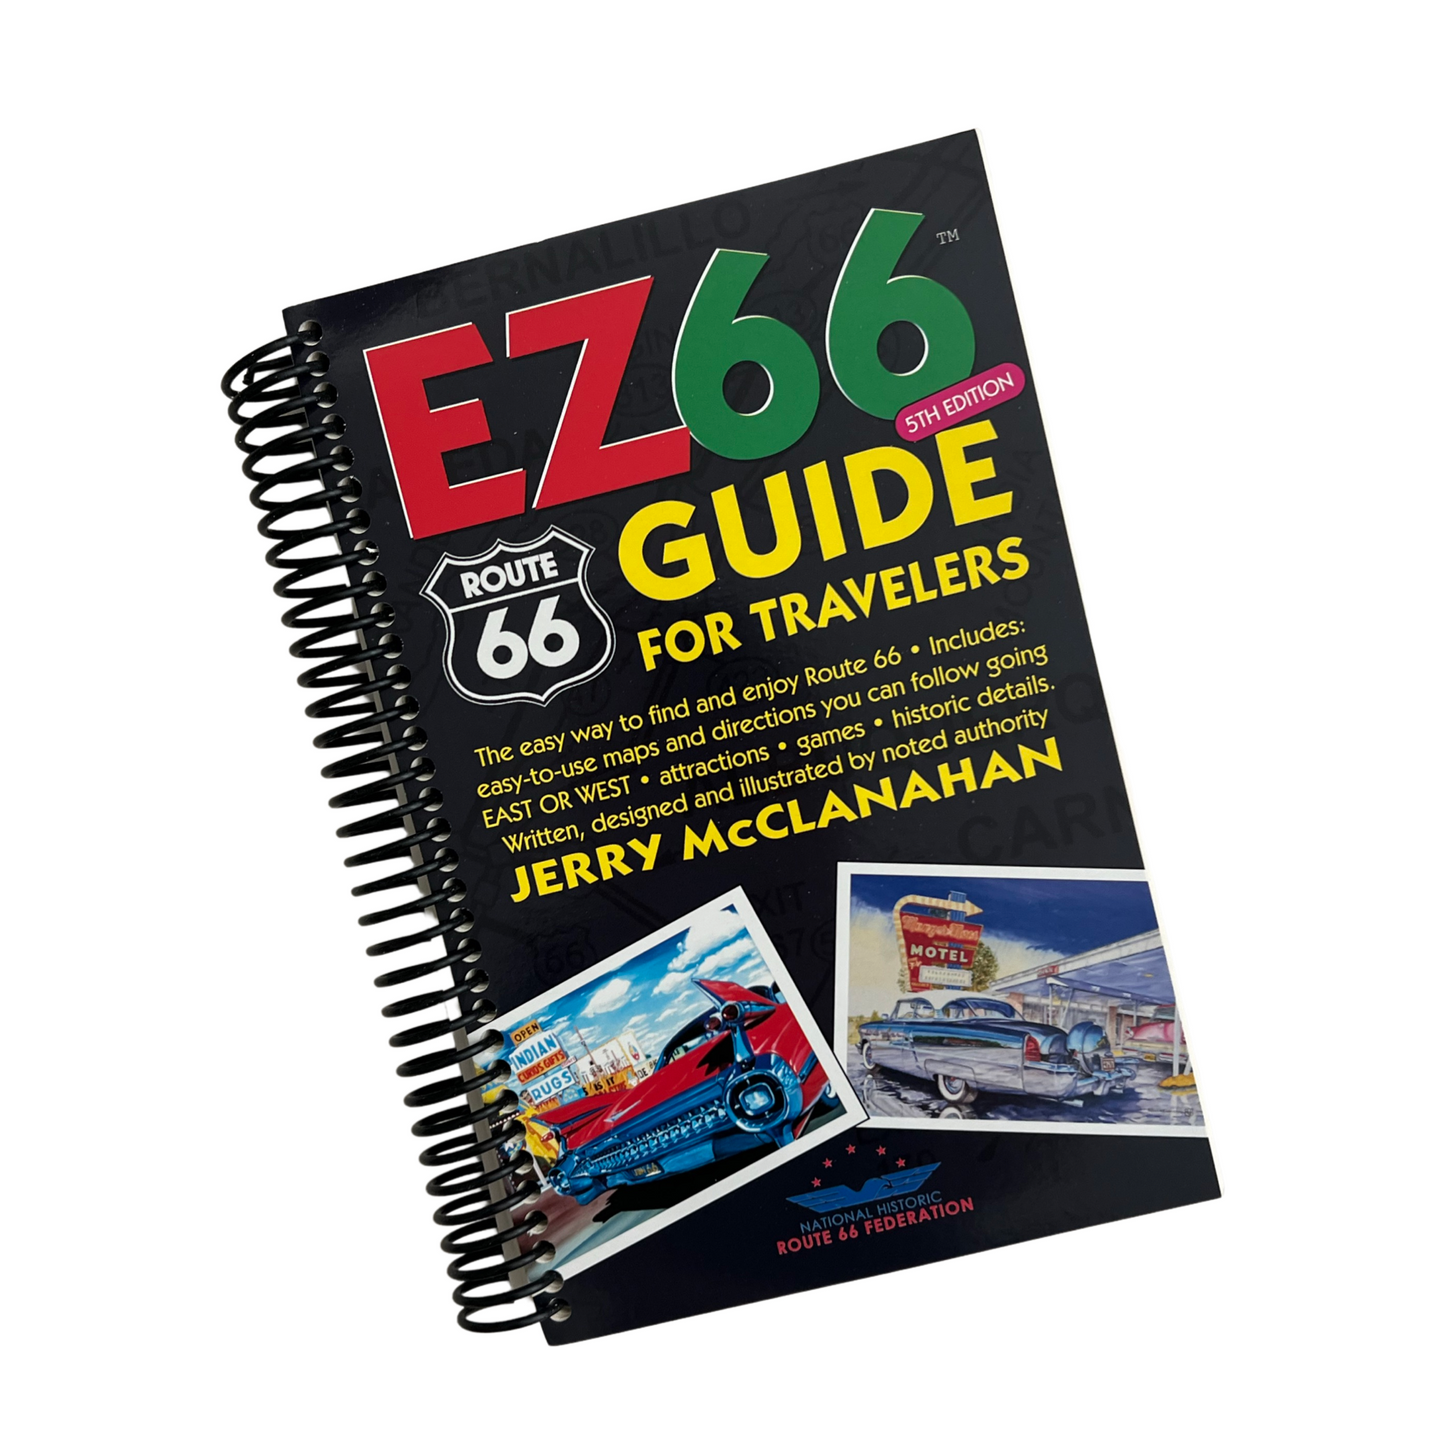 EZ66 Guide for Travelers 5th Edition by Jerry McClanahan